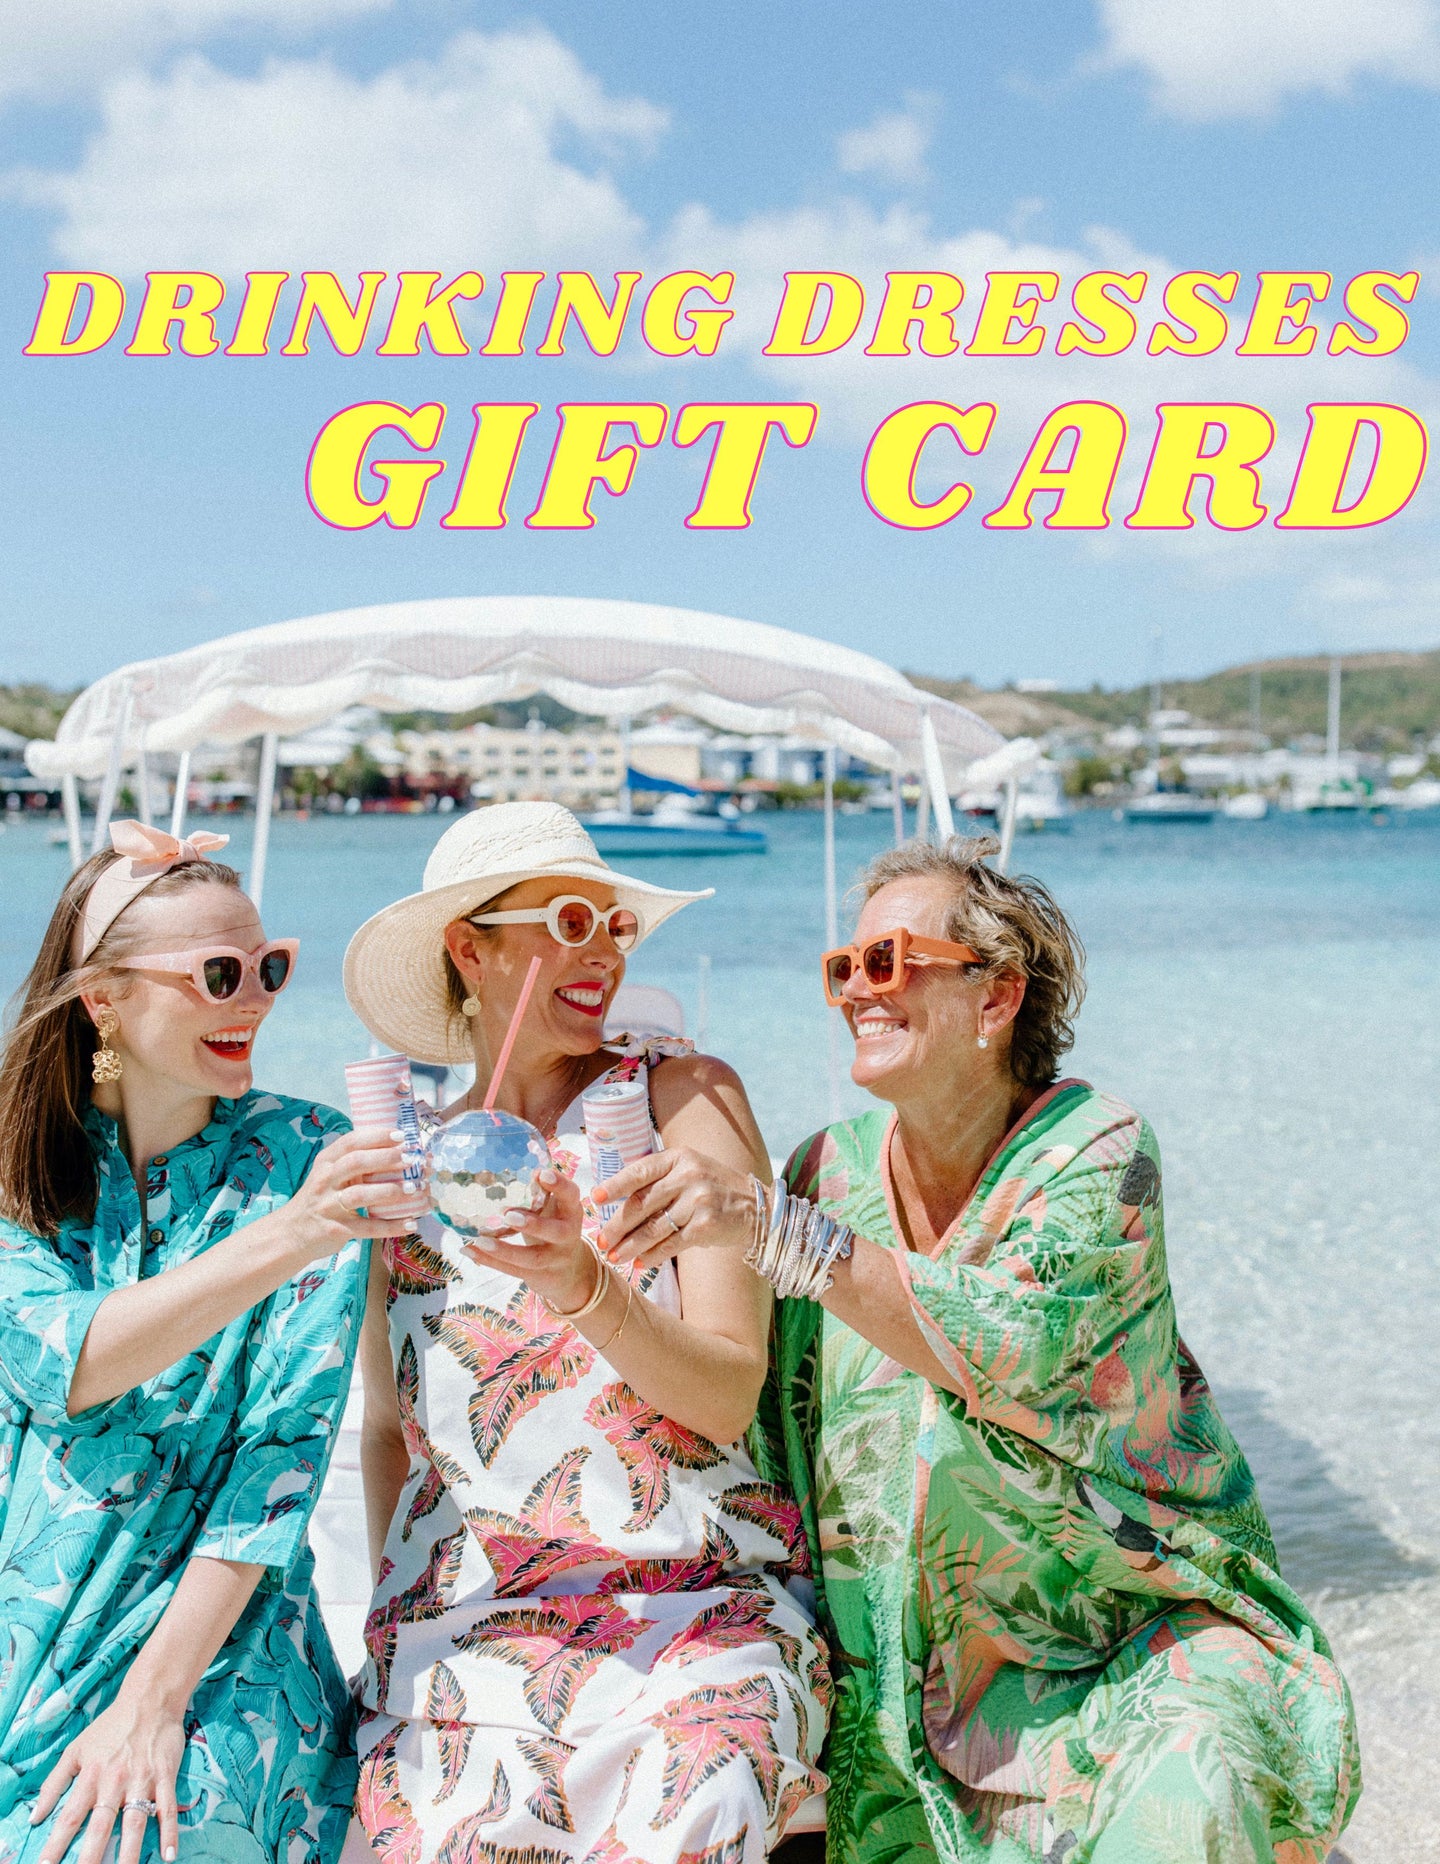 Drinking Dresses Gift Card